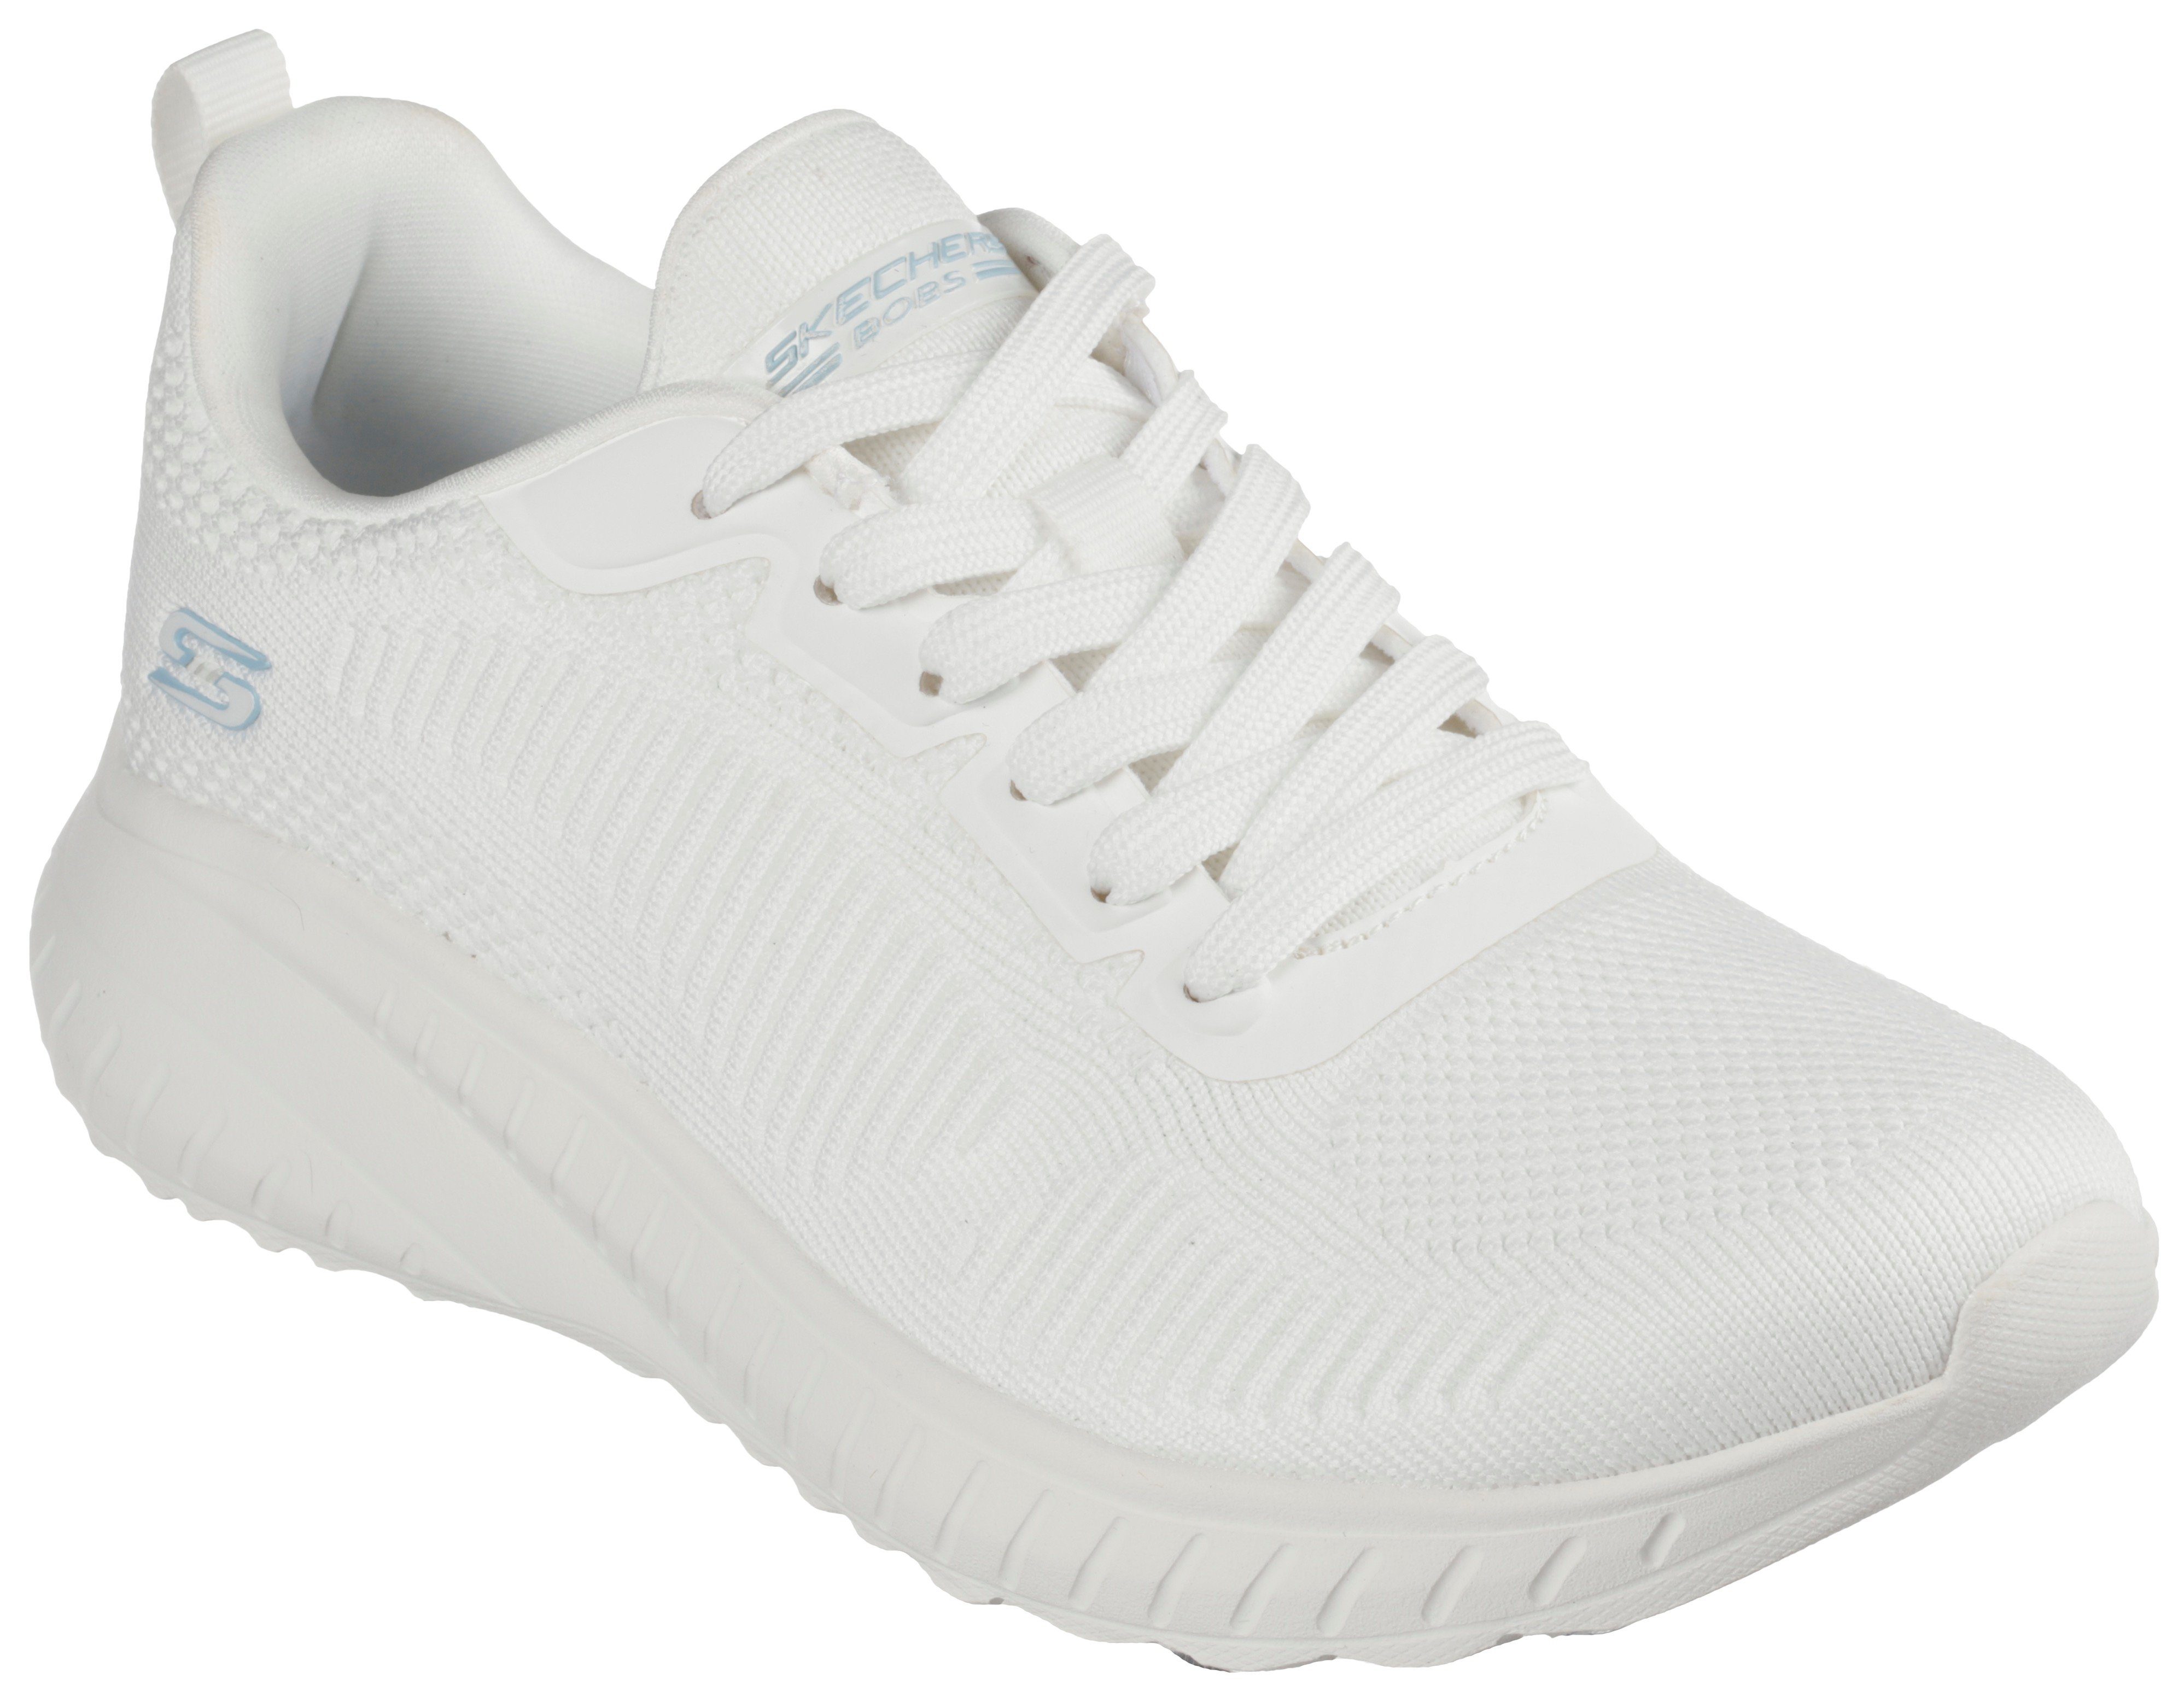 Skechers BOBS SQUAD CHAOS FACE OFF Sneaker mit komfortabler Innensohle offwhite